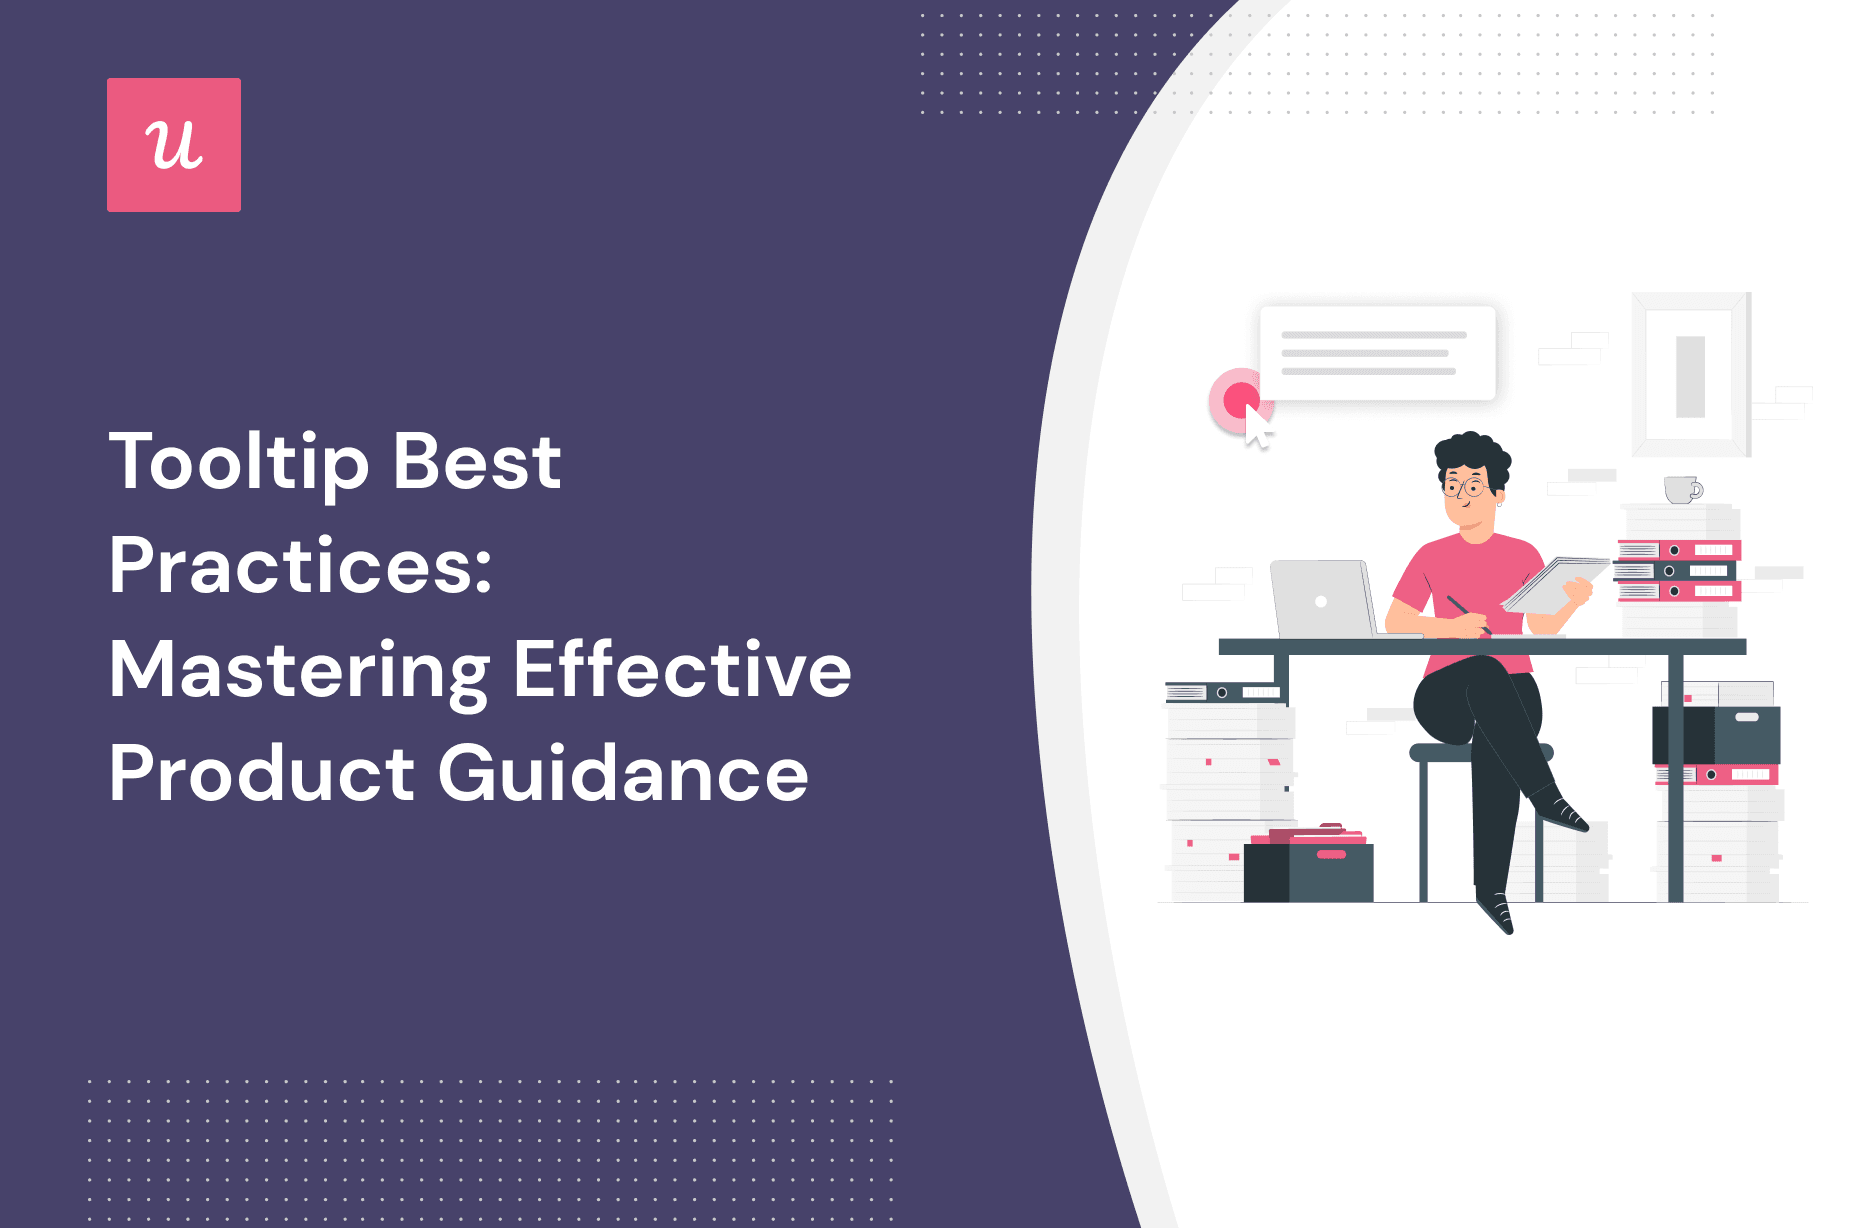 Tooltip Best Practices: Mastering Effective Product Guidance